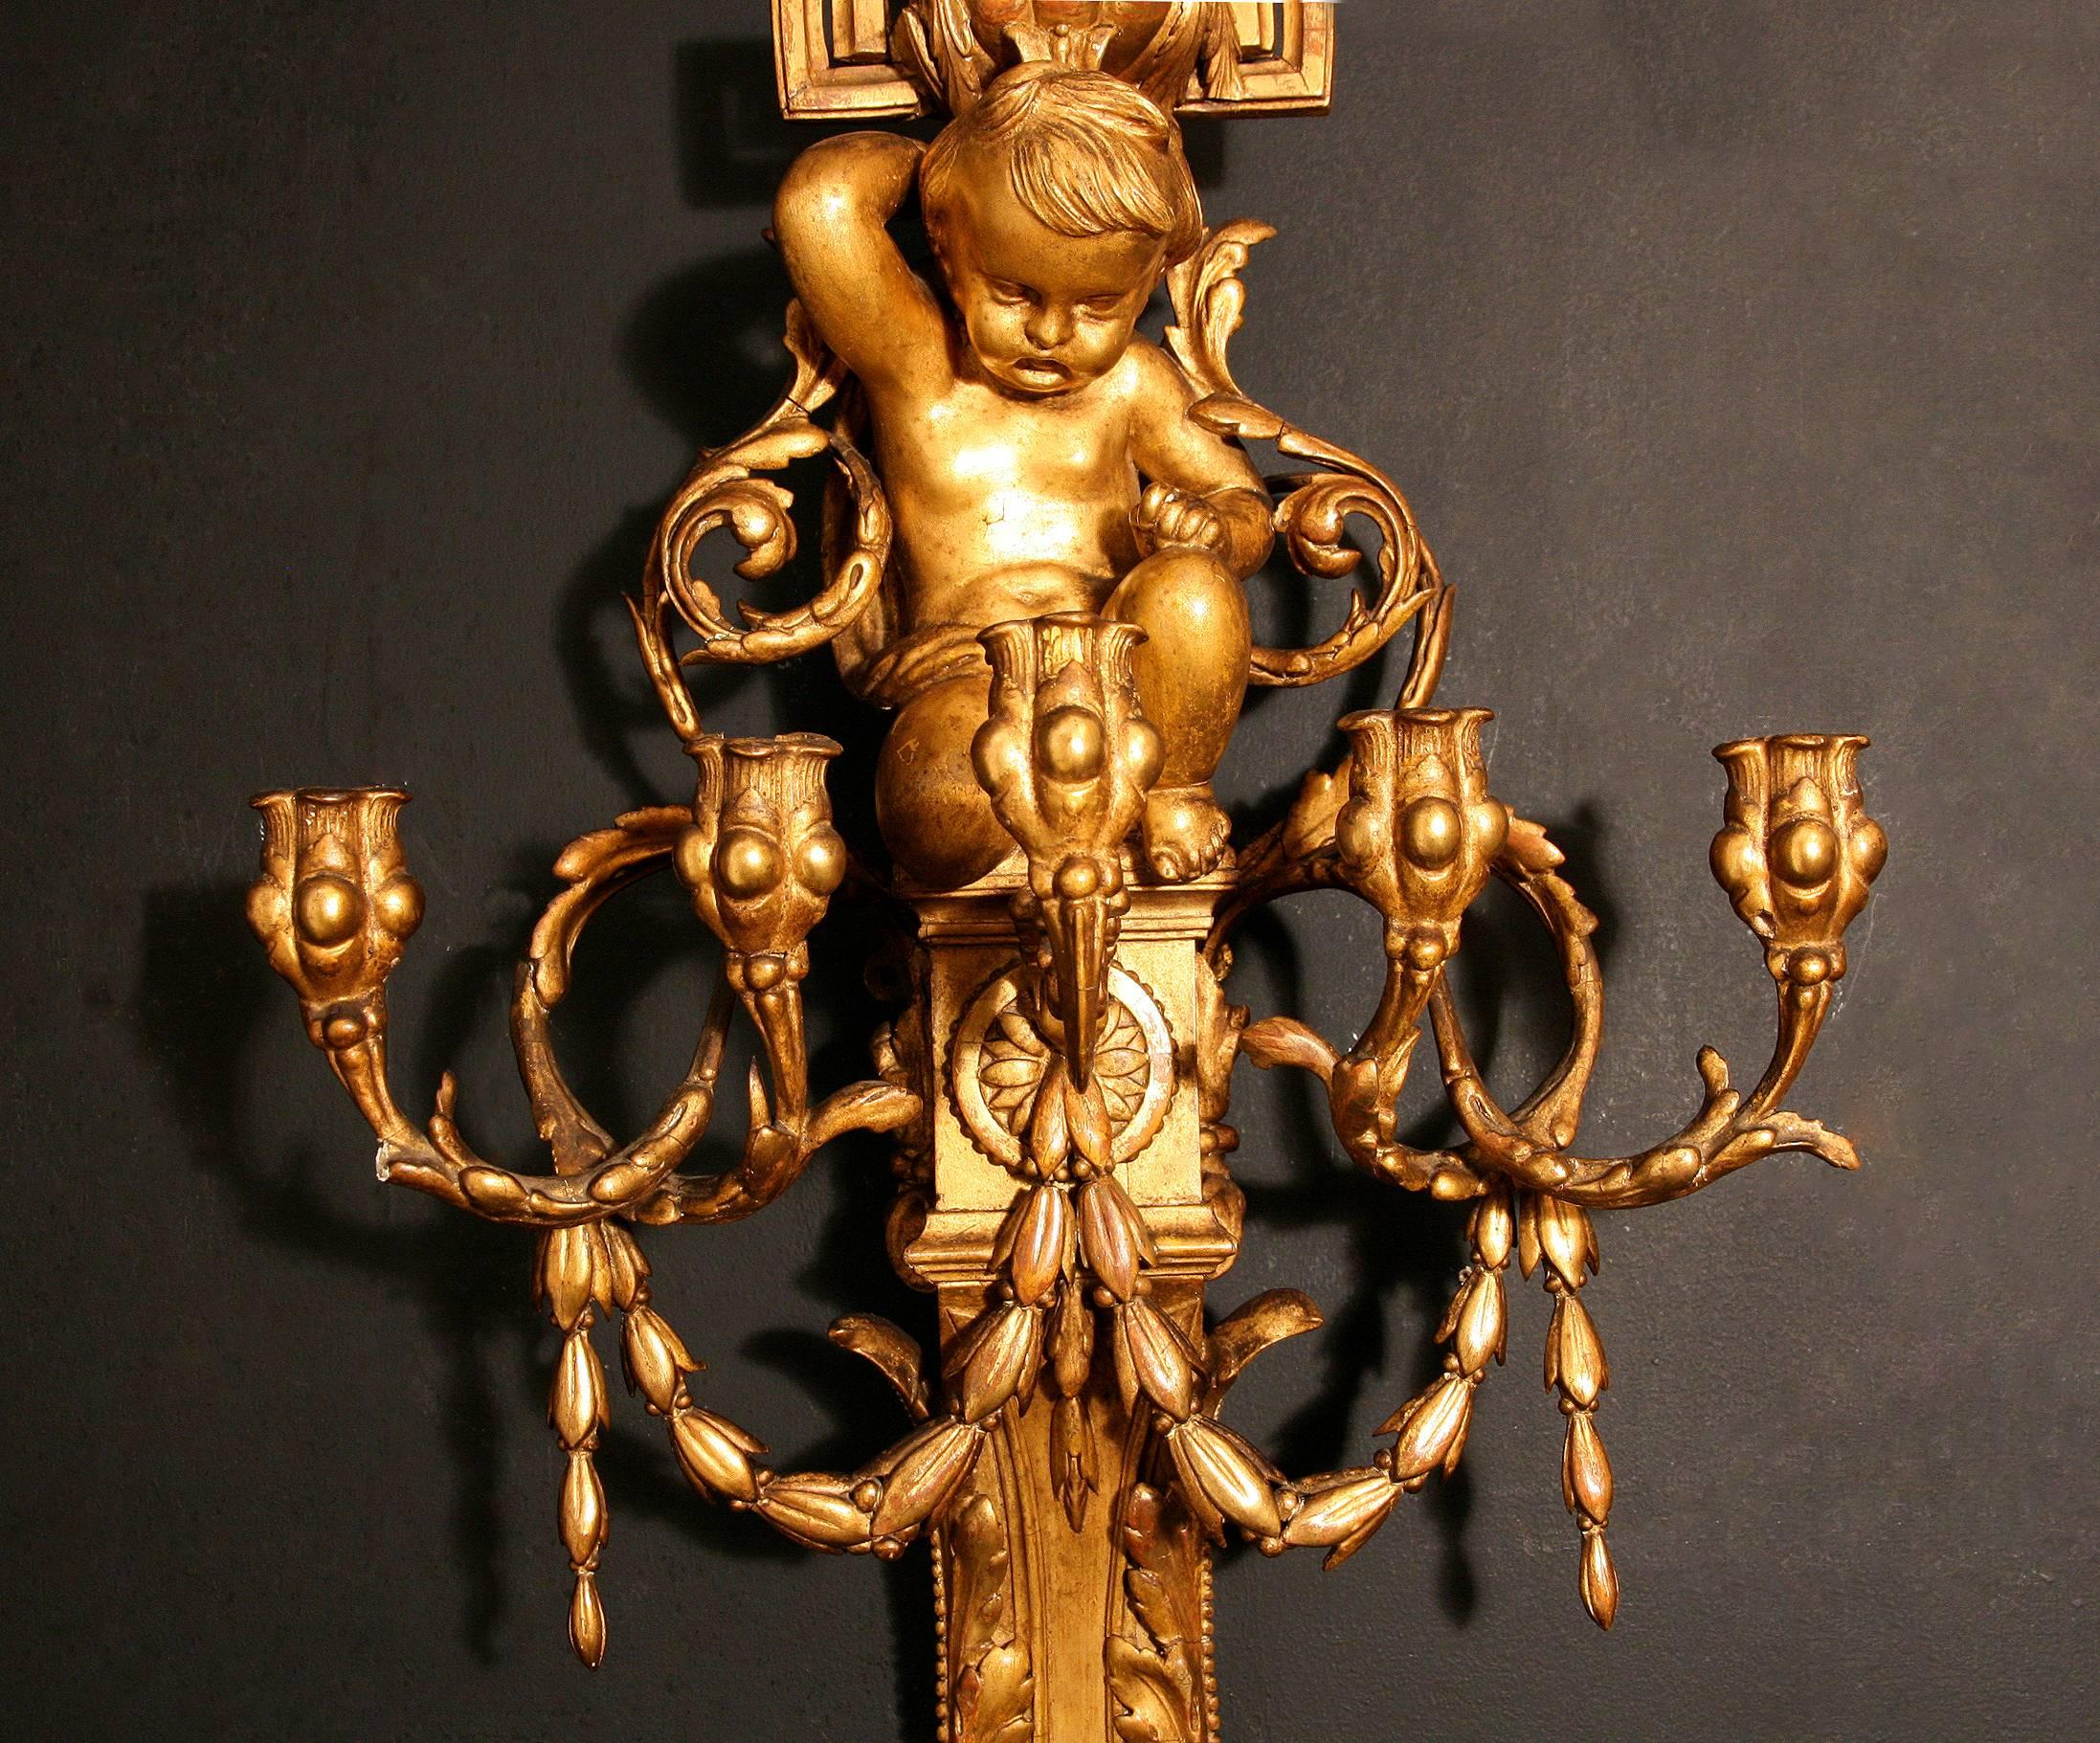 A large pair of Louis XVI style, gesso and carved giltwood, five-arm wall sconces. Depicting a cherub with floral and acanthus wreaths. Late 19th century.